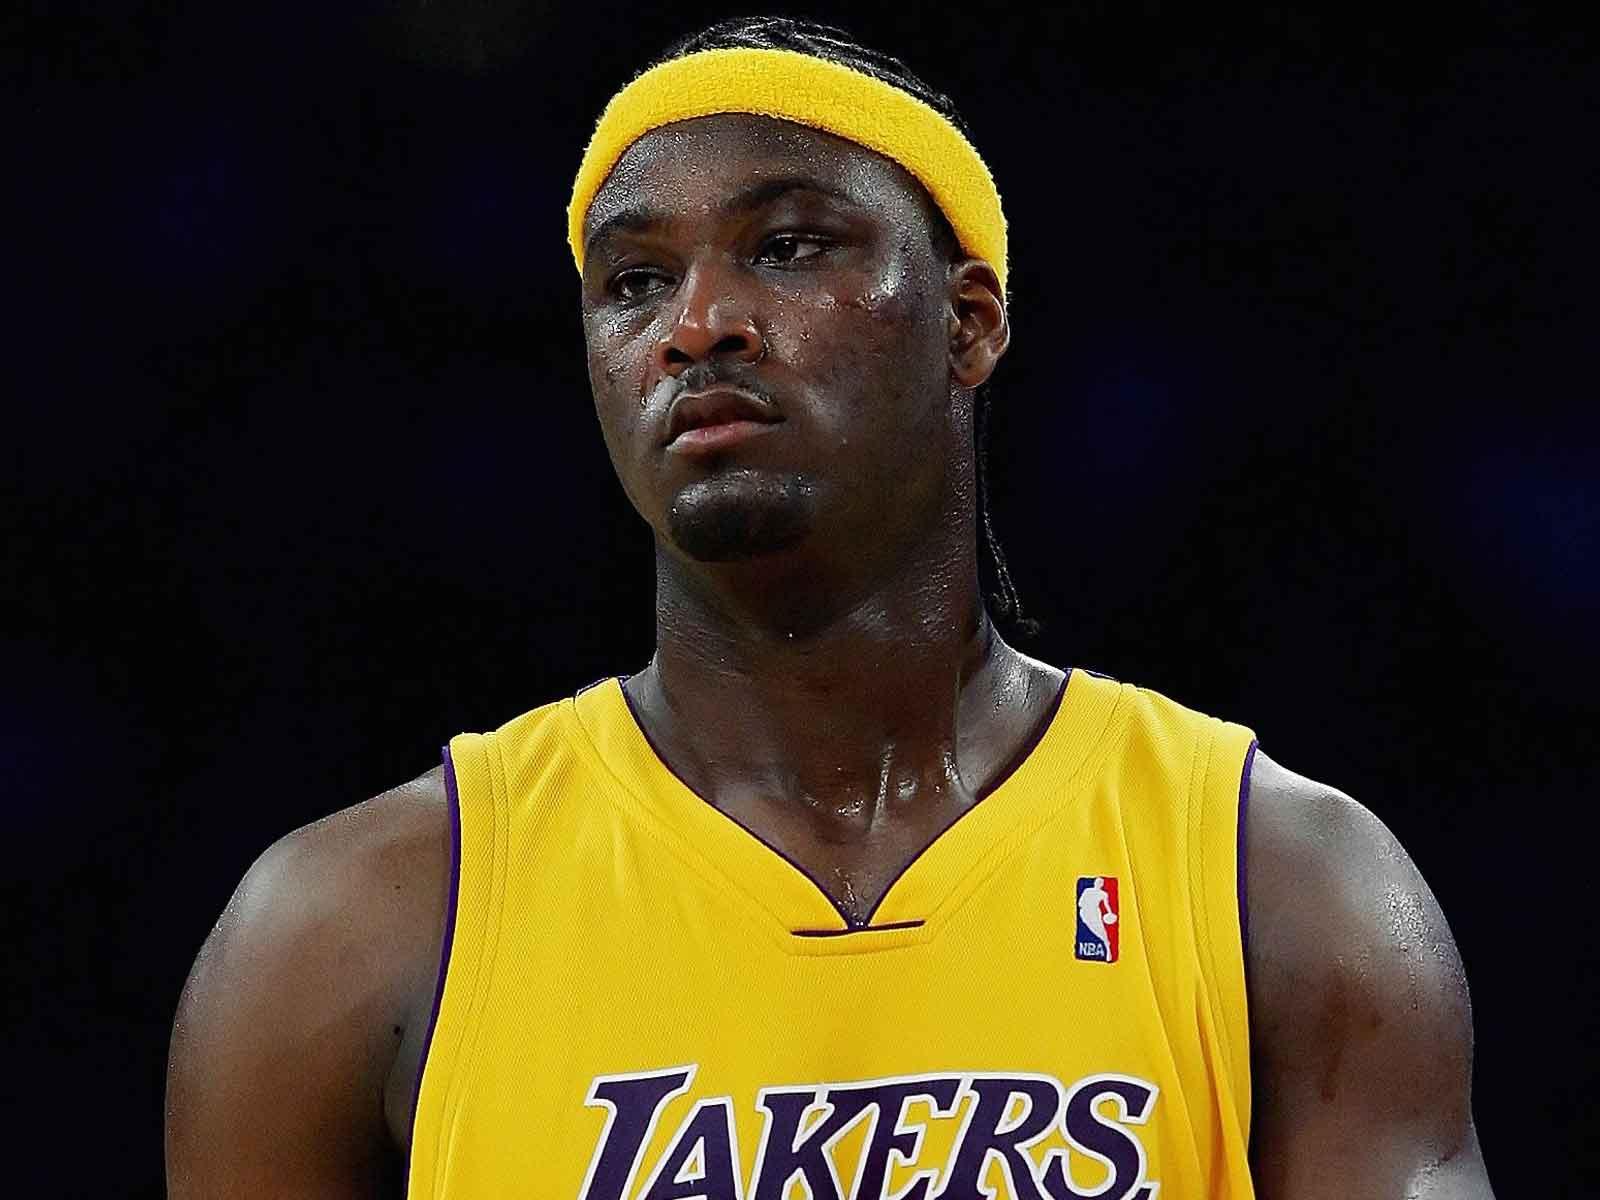 Ex-NBA Star Kwame Brown Sues Financial Adviser for Allegedly Stealing $17.4 Million of His Money